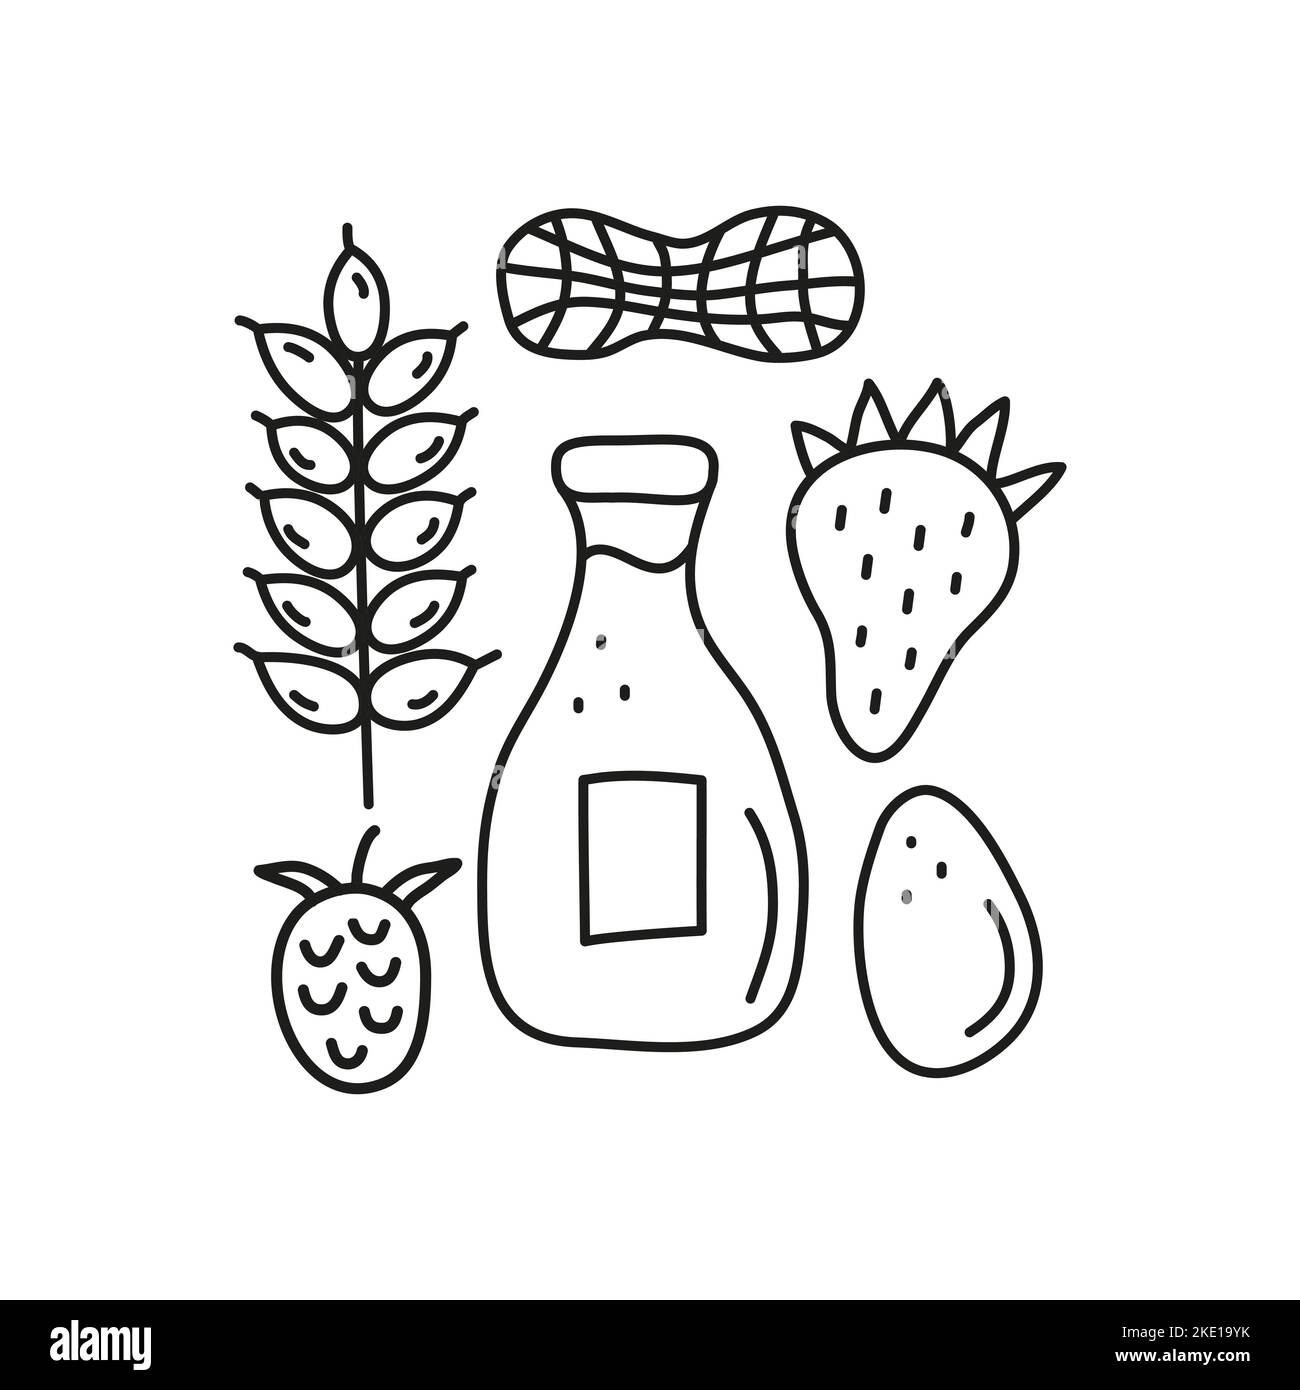 Group of doodle outline food allergens including wheat, raspberry, peanut, milk in bottle, strawberry, egg isolated on white background. Stock Vector